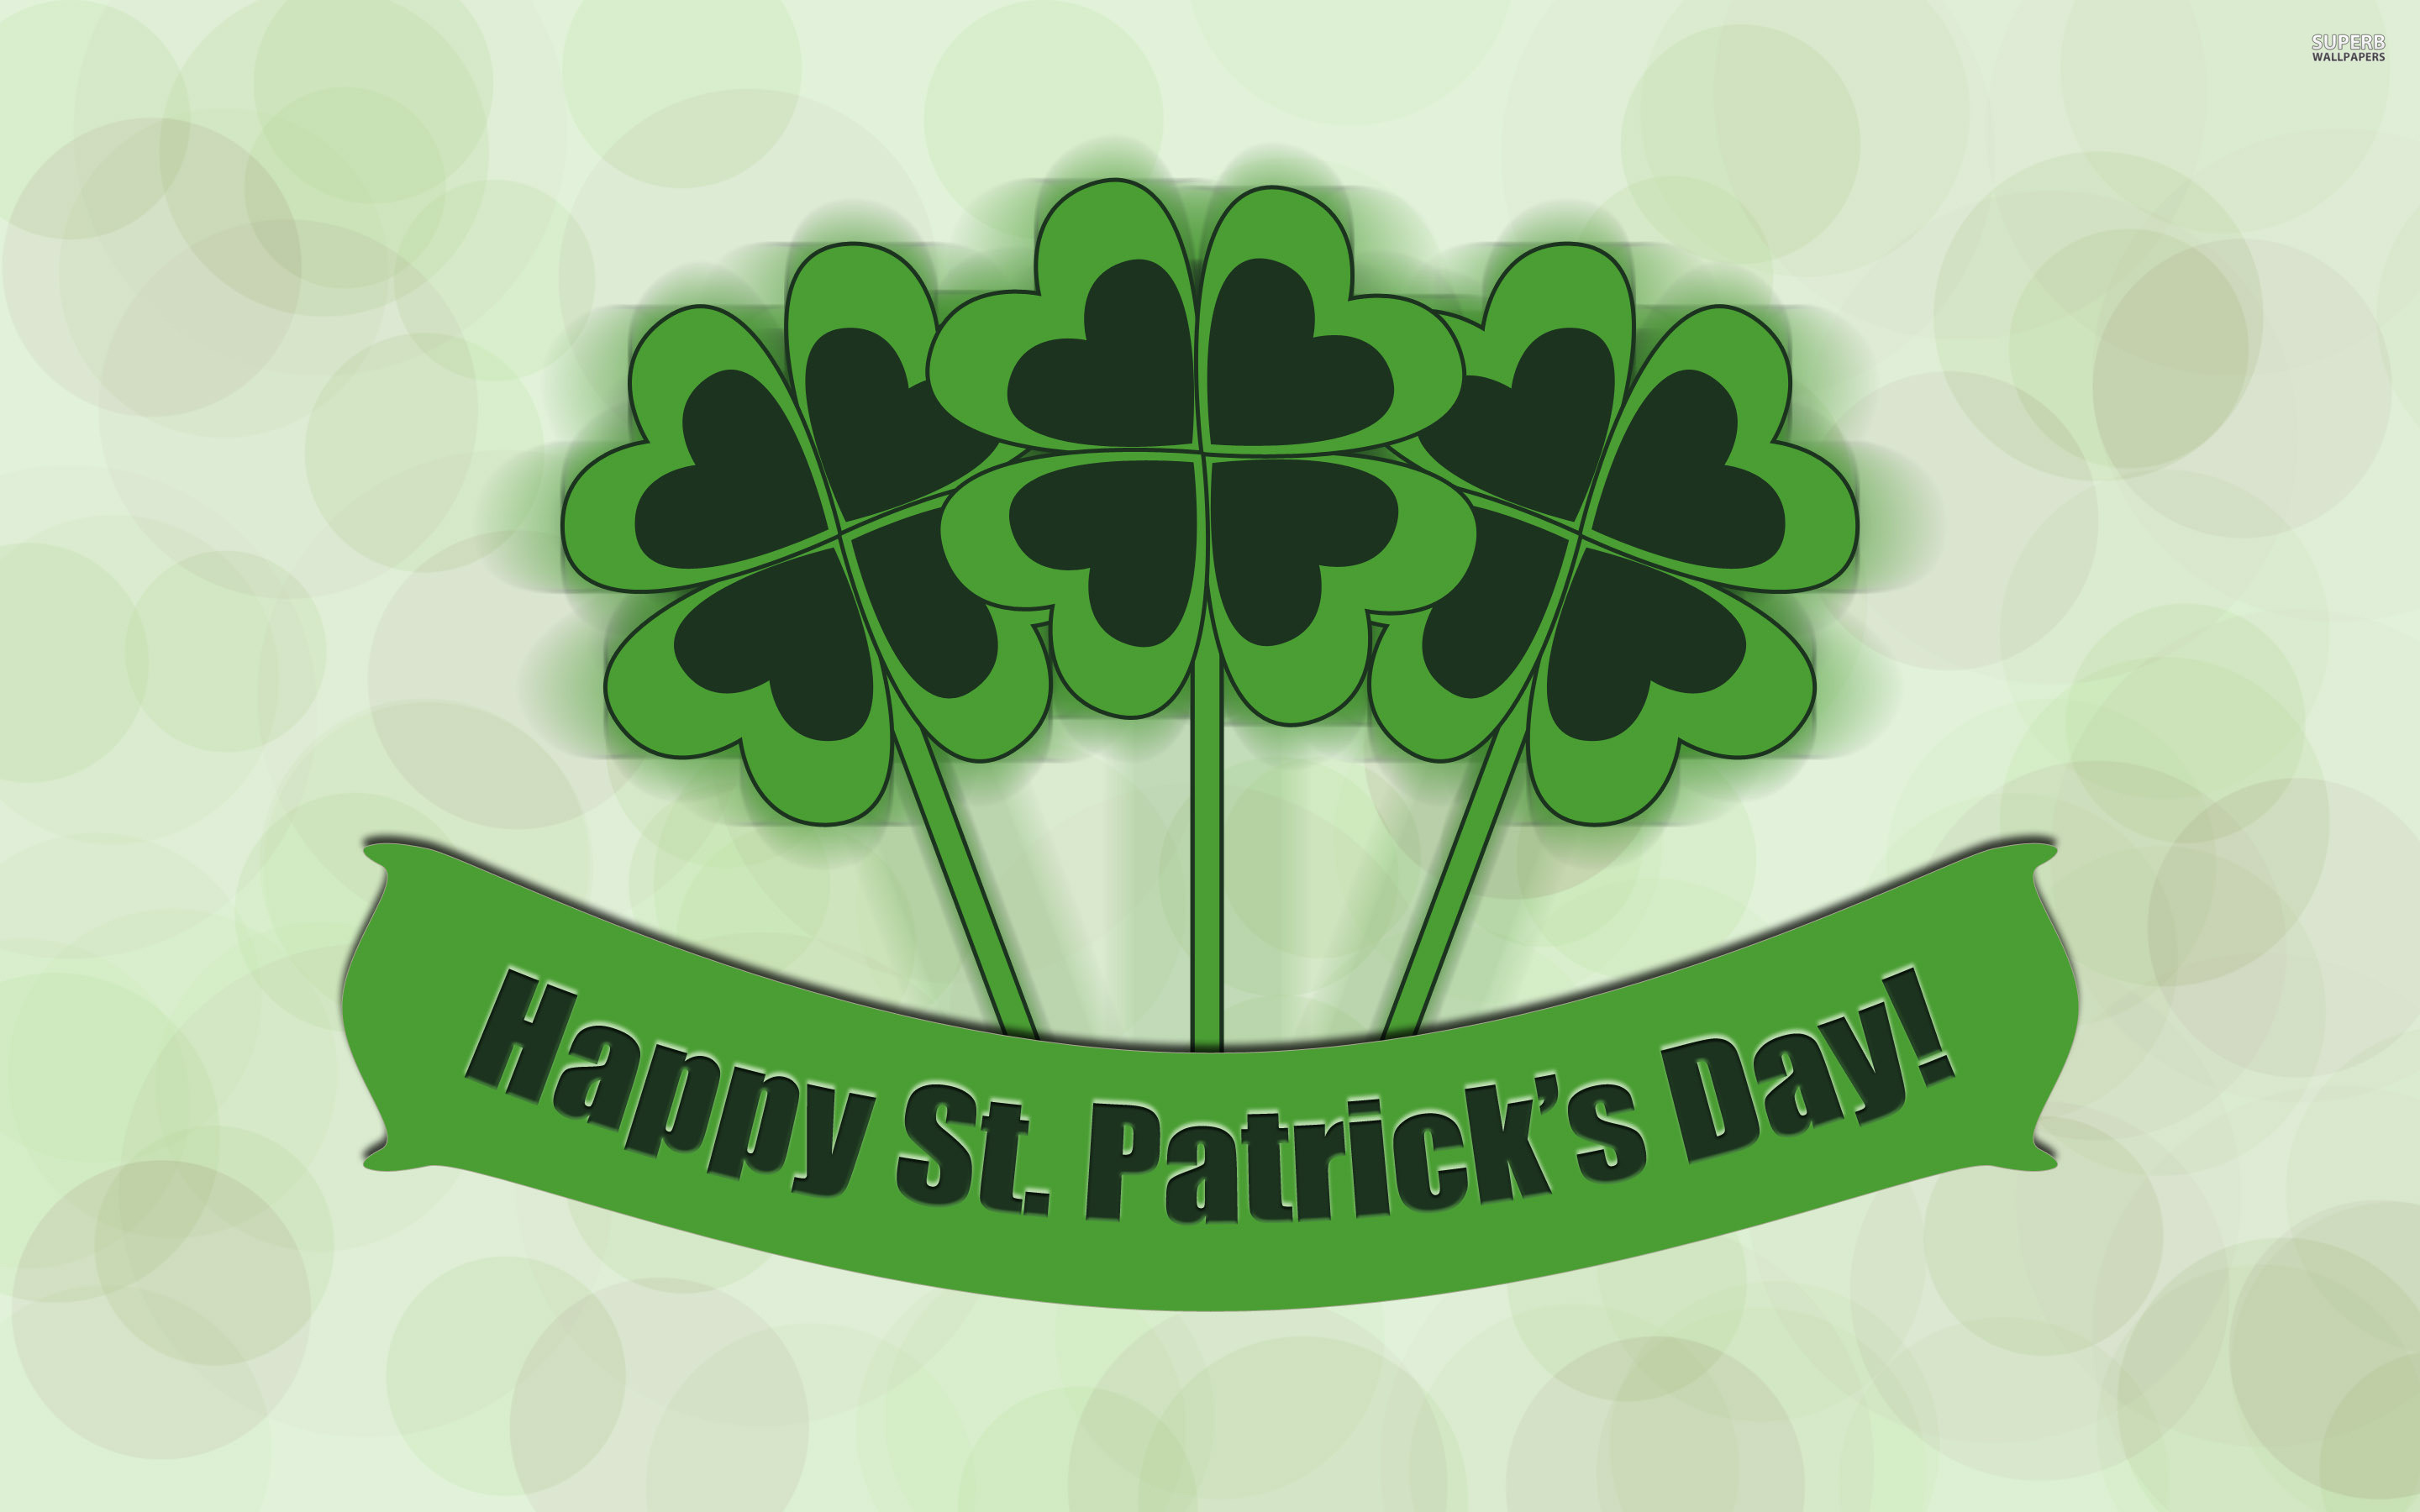 2880x1800 Four-leaf clovers are hilariously inappropriate for St. Patrick's Day